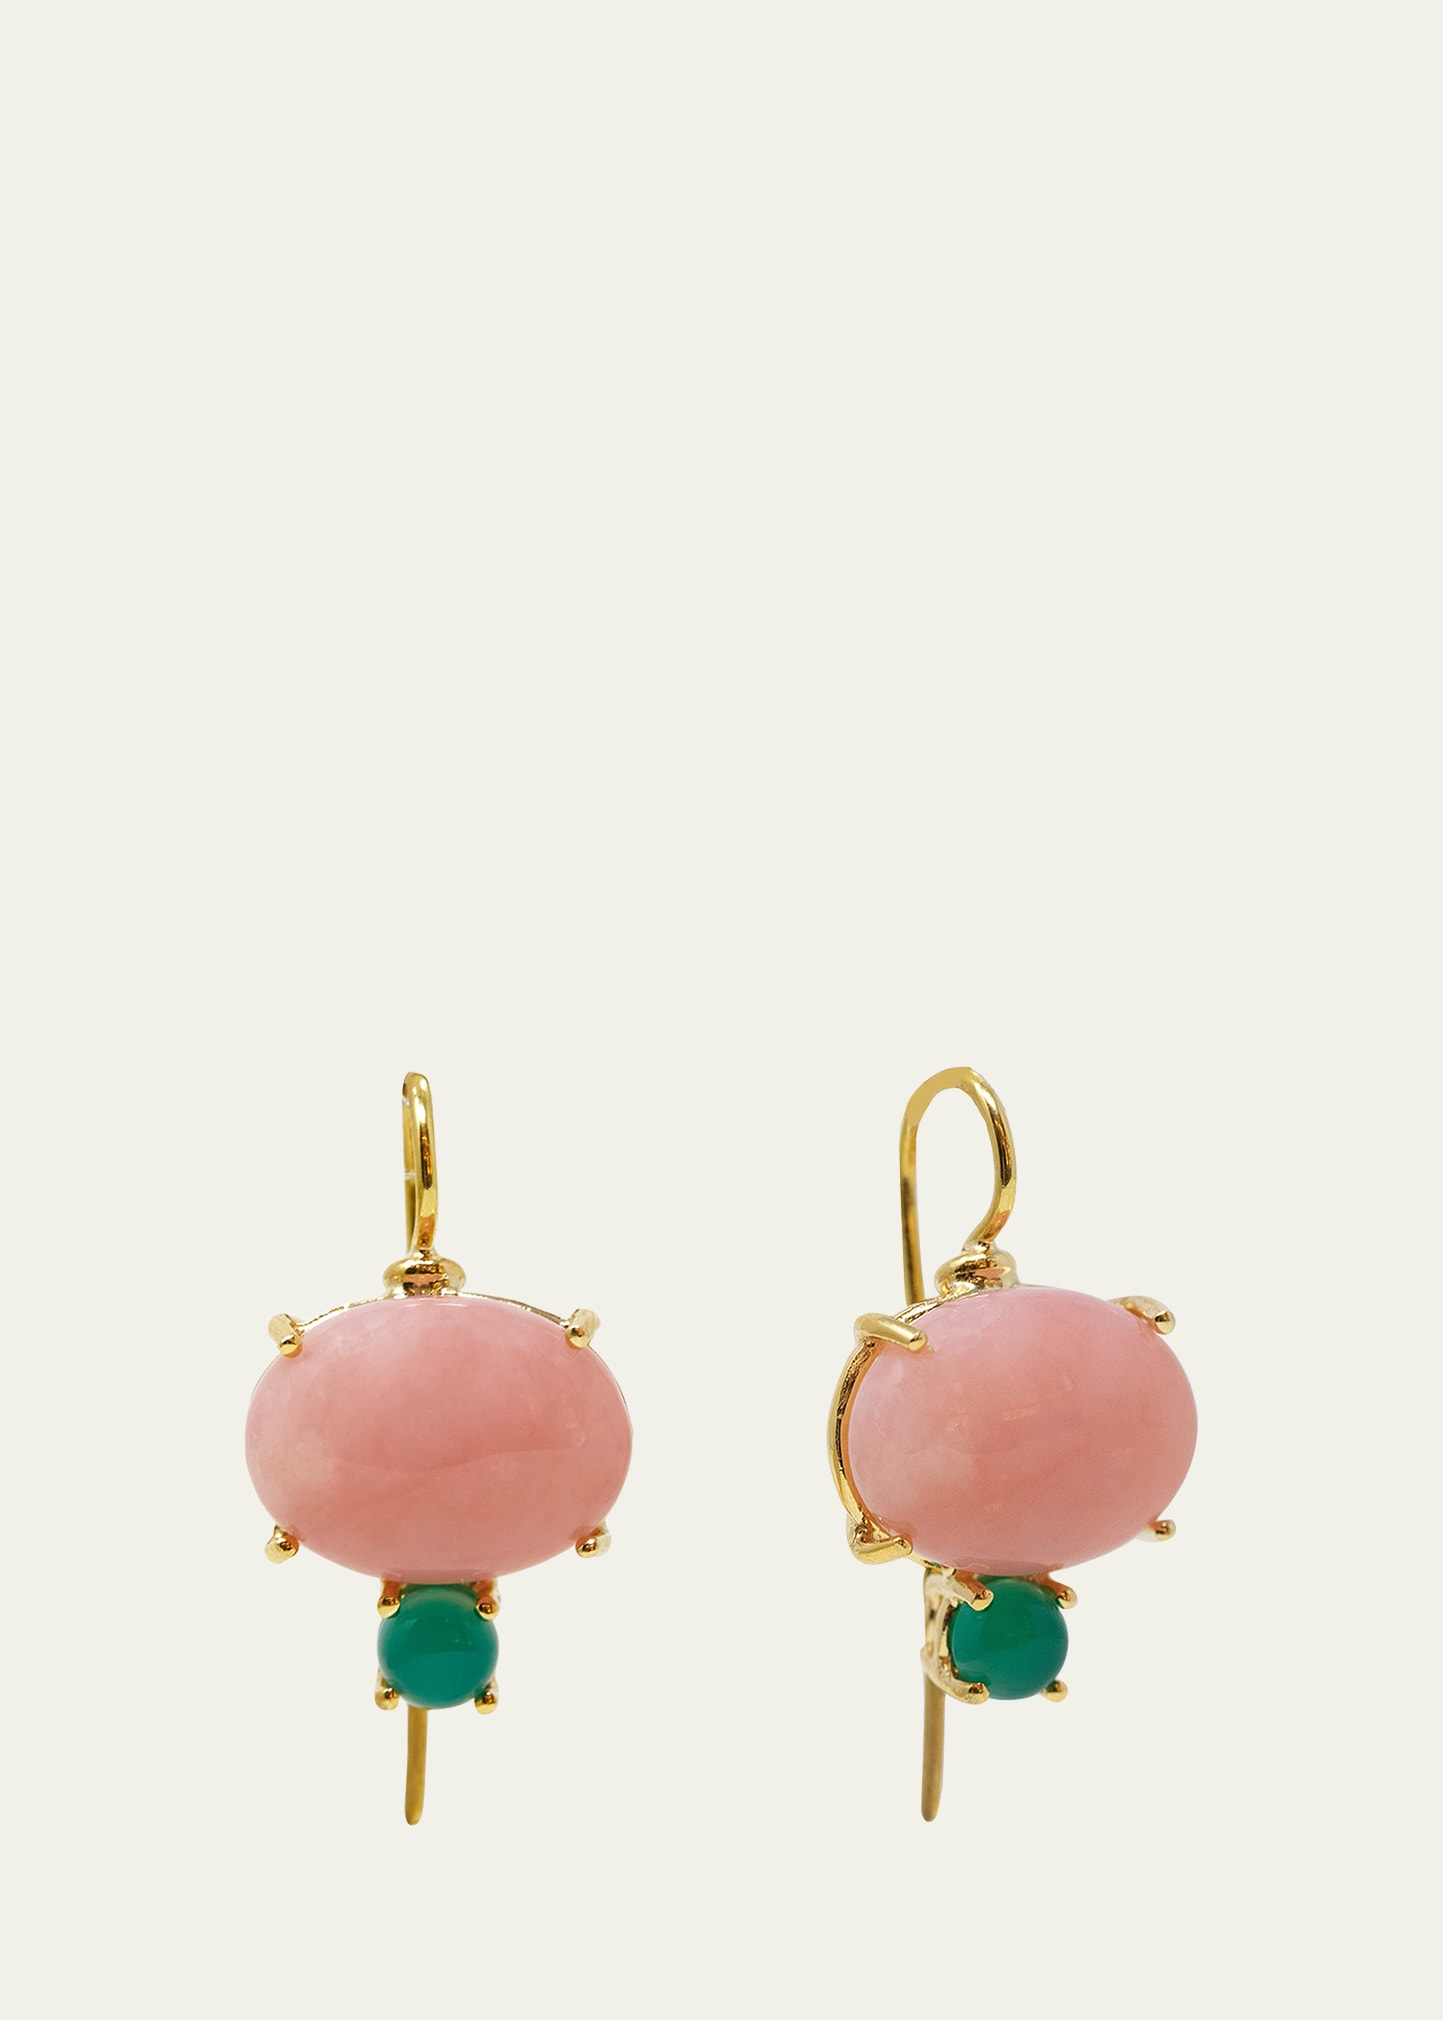 Grazia And Marica Vozza 18k Yellow Gold Monachina Stone Hook Earrings With Rhodonite And Green Agate In Yg